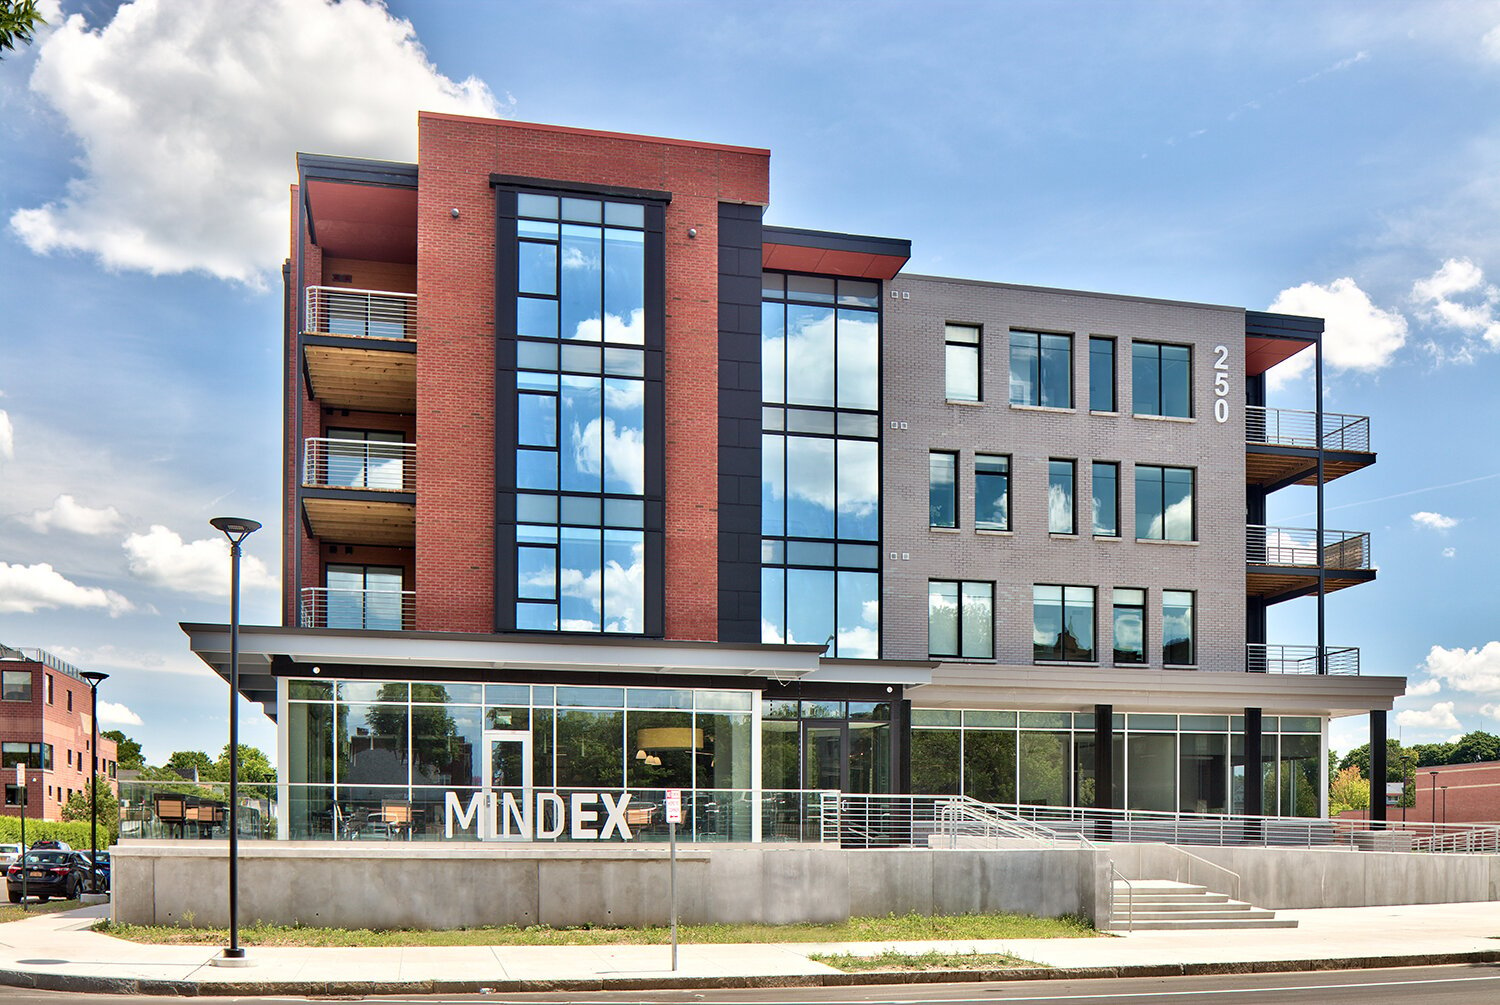 A view of the exterior of the Mindex office